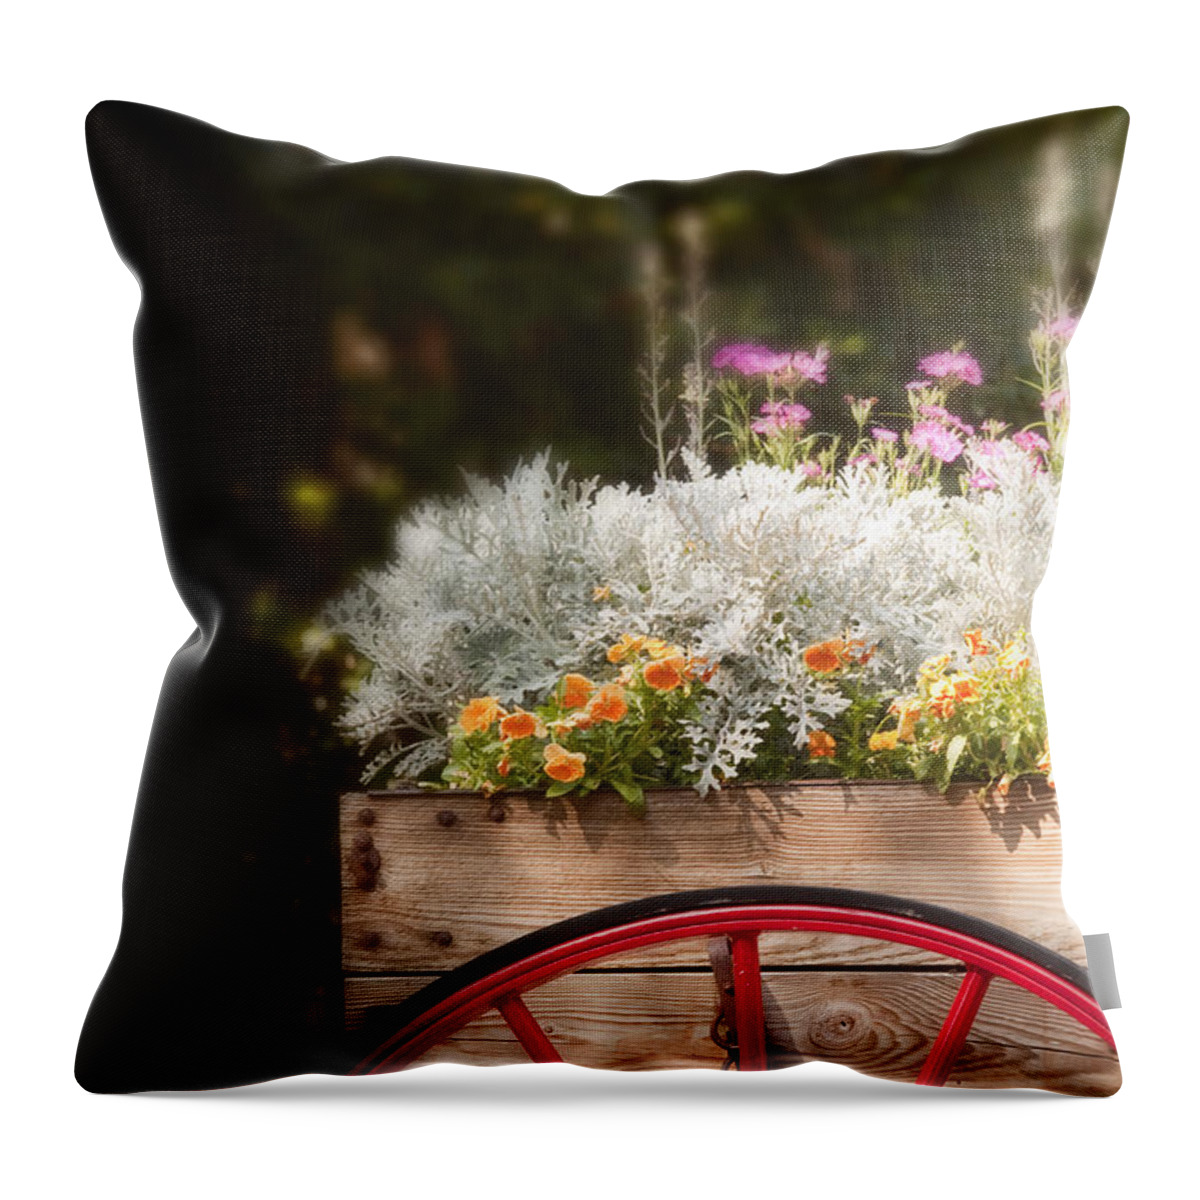 Flowers; Bright; Lovely; Colorful; Plants; Beautiful; Orange; Pink; White; Green; Cart; Nature; Wooden; Wheel; Red; Wood; For Sale; Peddler; Outside; Outdoors; Decorative; Country Throw Pillow featuring the photograph Vintage Beauties for Sale by Margie Hurwich